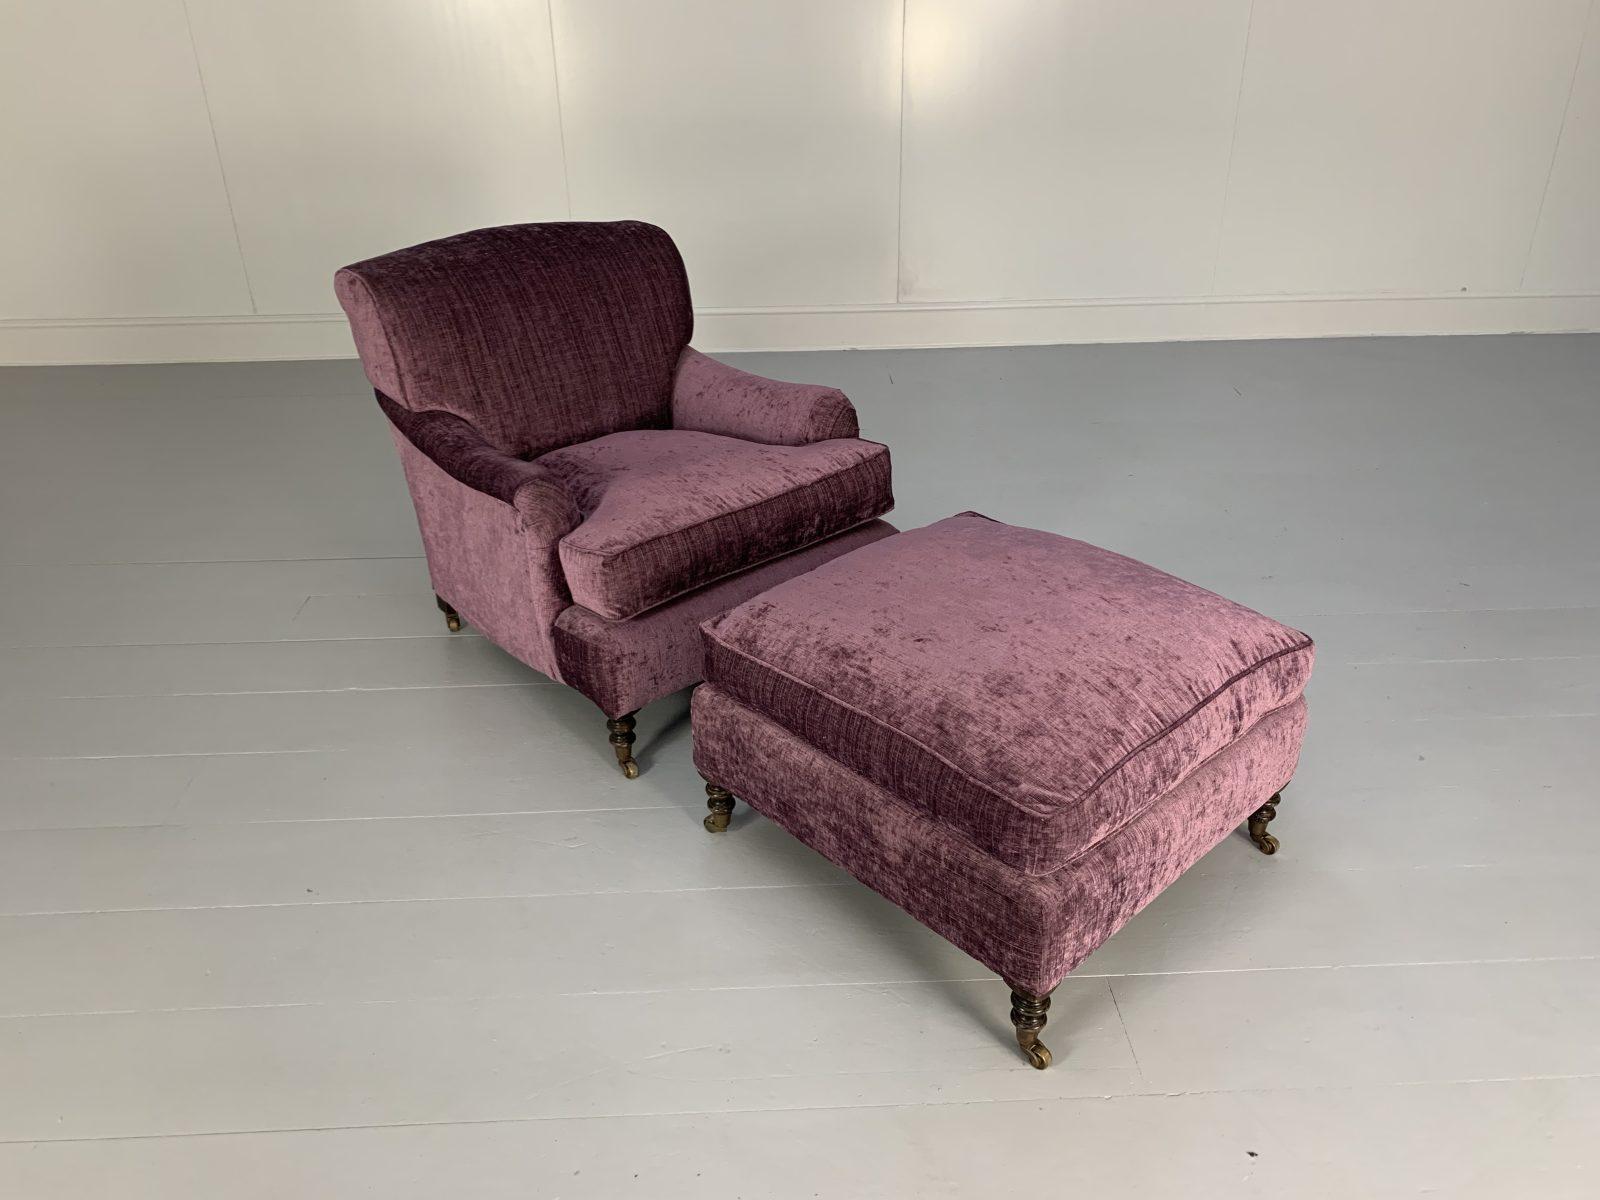 Hello Friends, and welcome to another unmissable offering from Lord Browns Furniture, the UK’s premier resource for fine Sofas and Chairs.
On offer on this occasion is an outstanding George Smith “Standard-Arm” Signature “Medium” Armchair and Run-Up